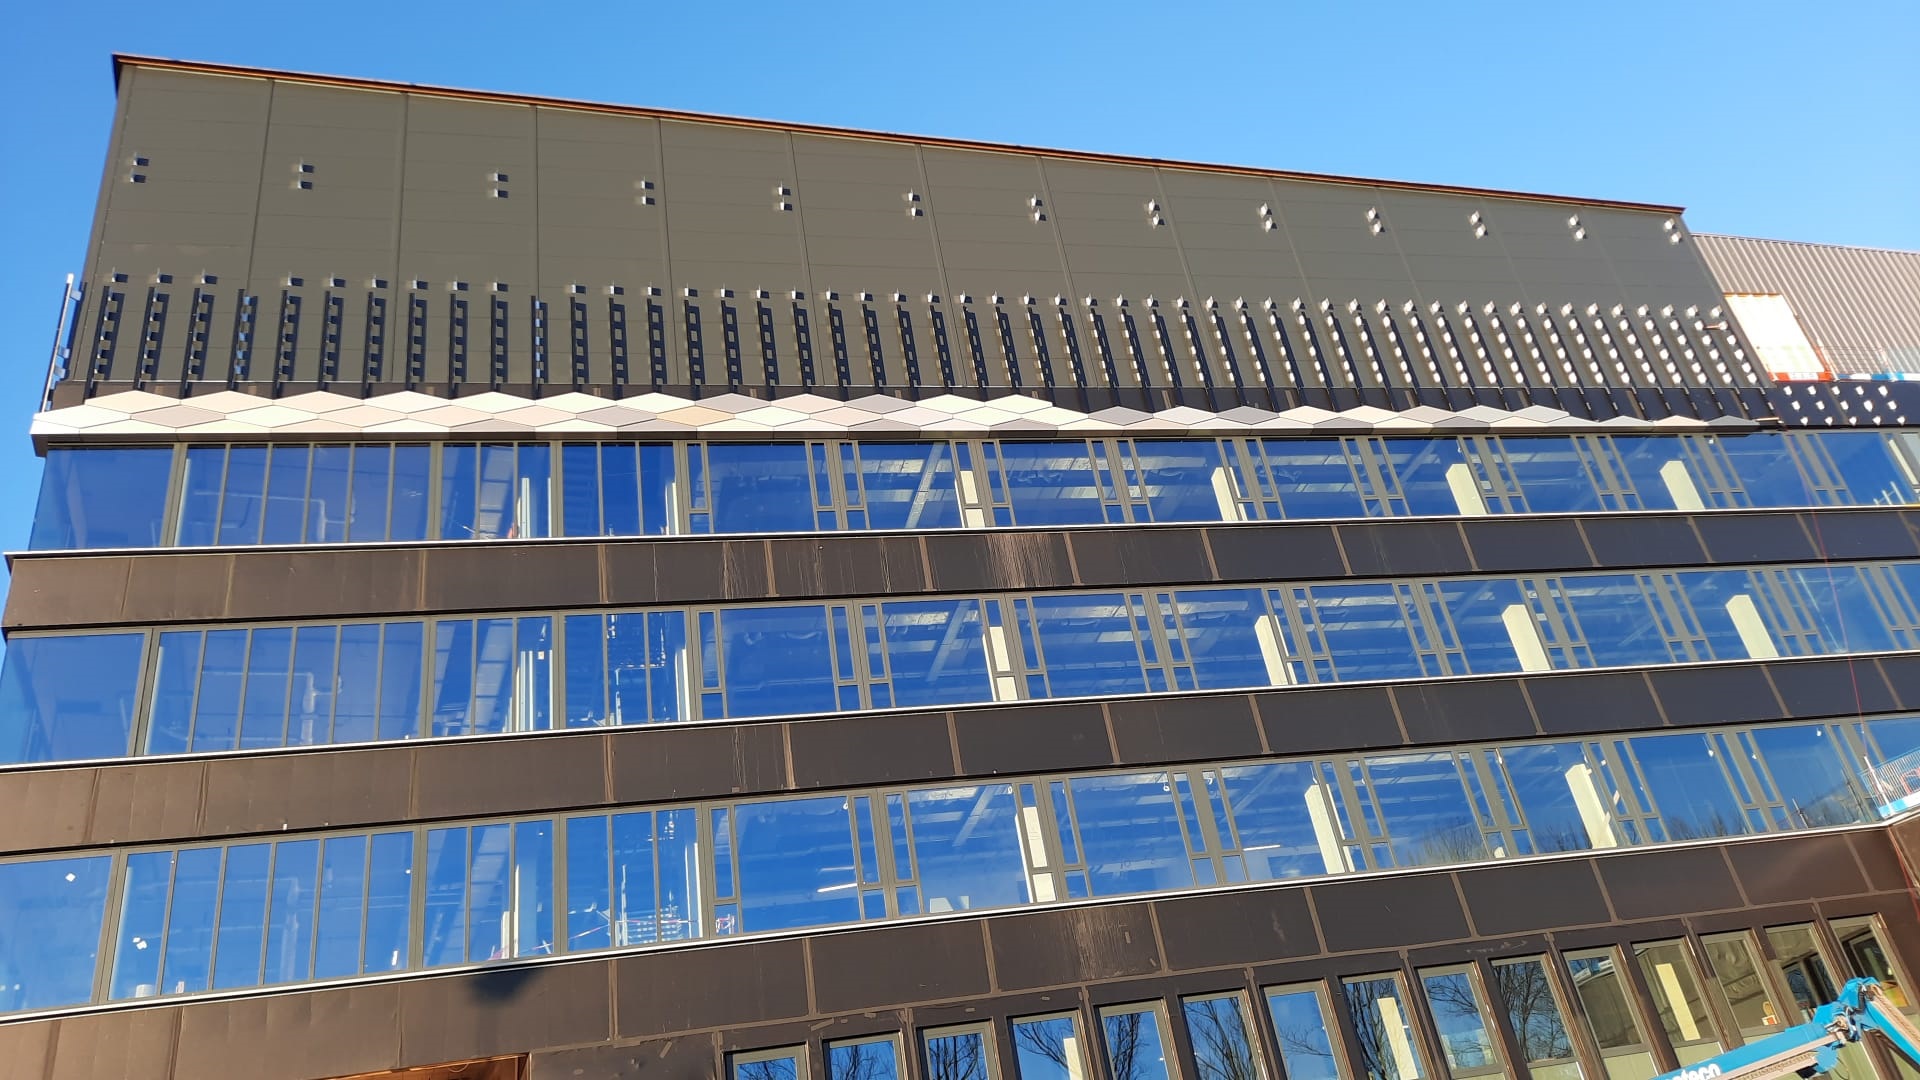 First 'wybert' slates have been installed above the highest windows on the façade of the Feringa Building